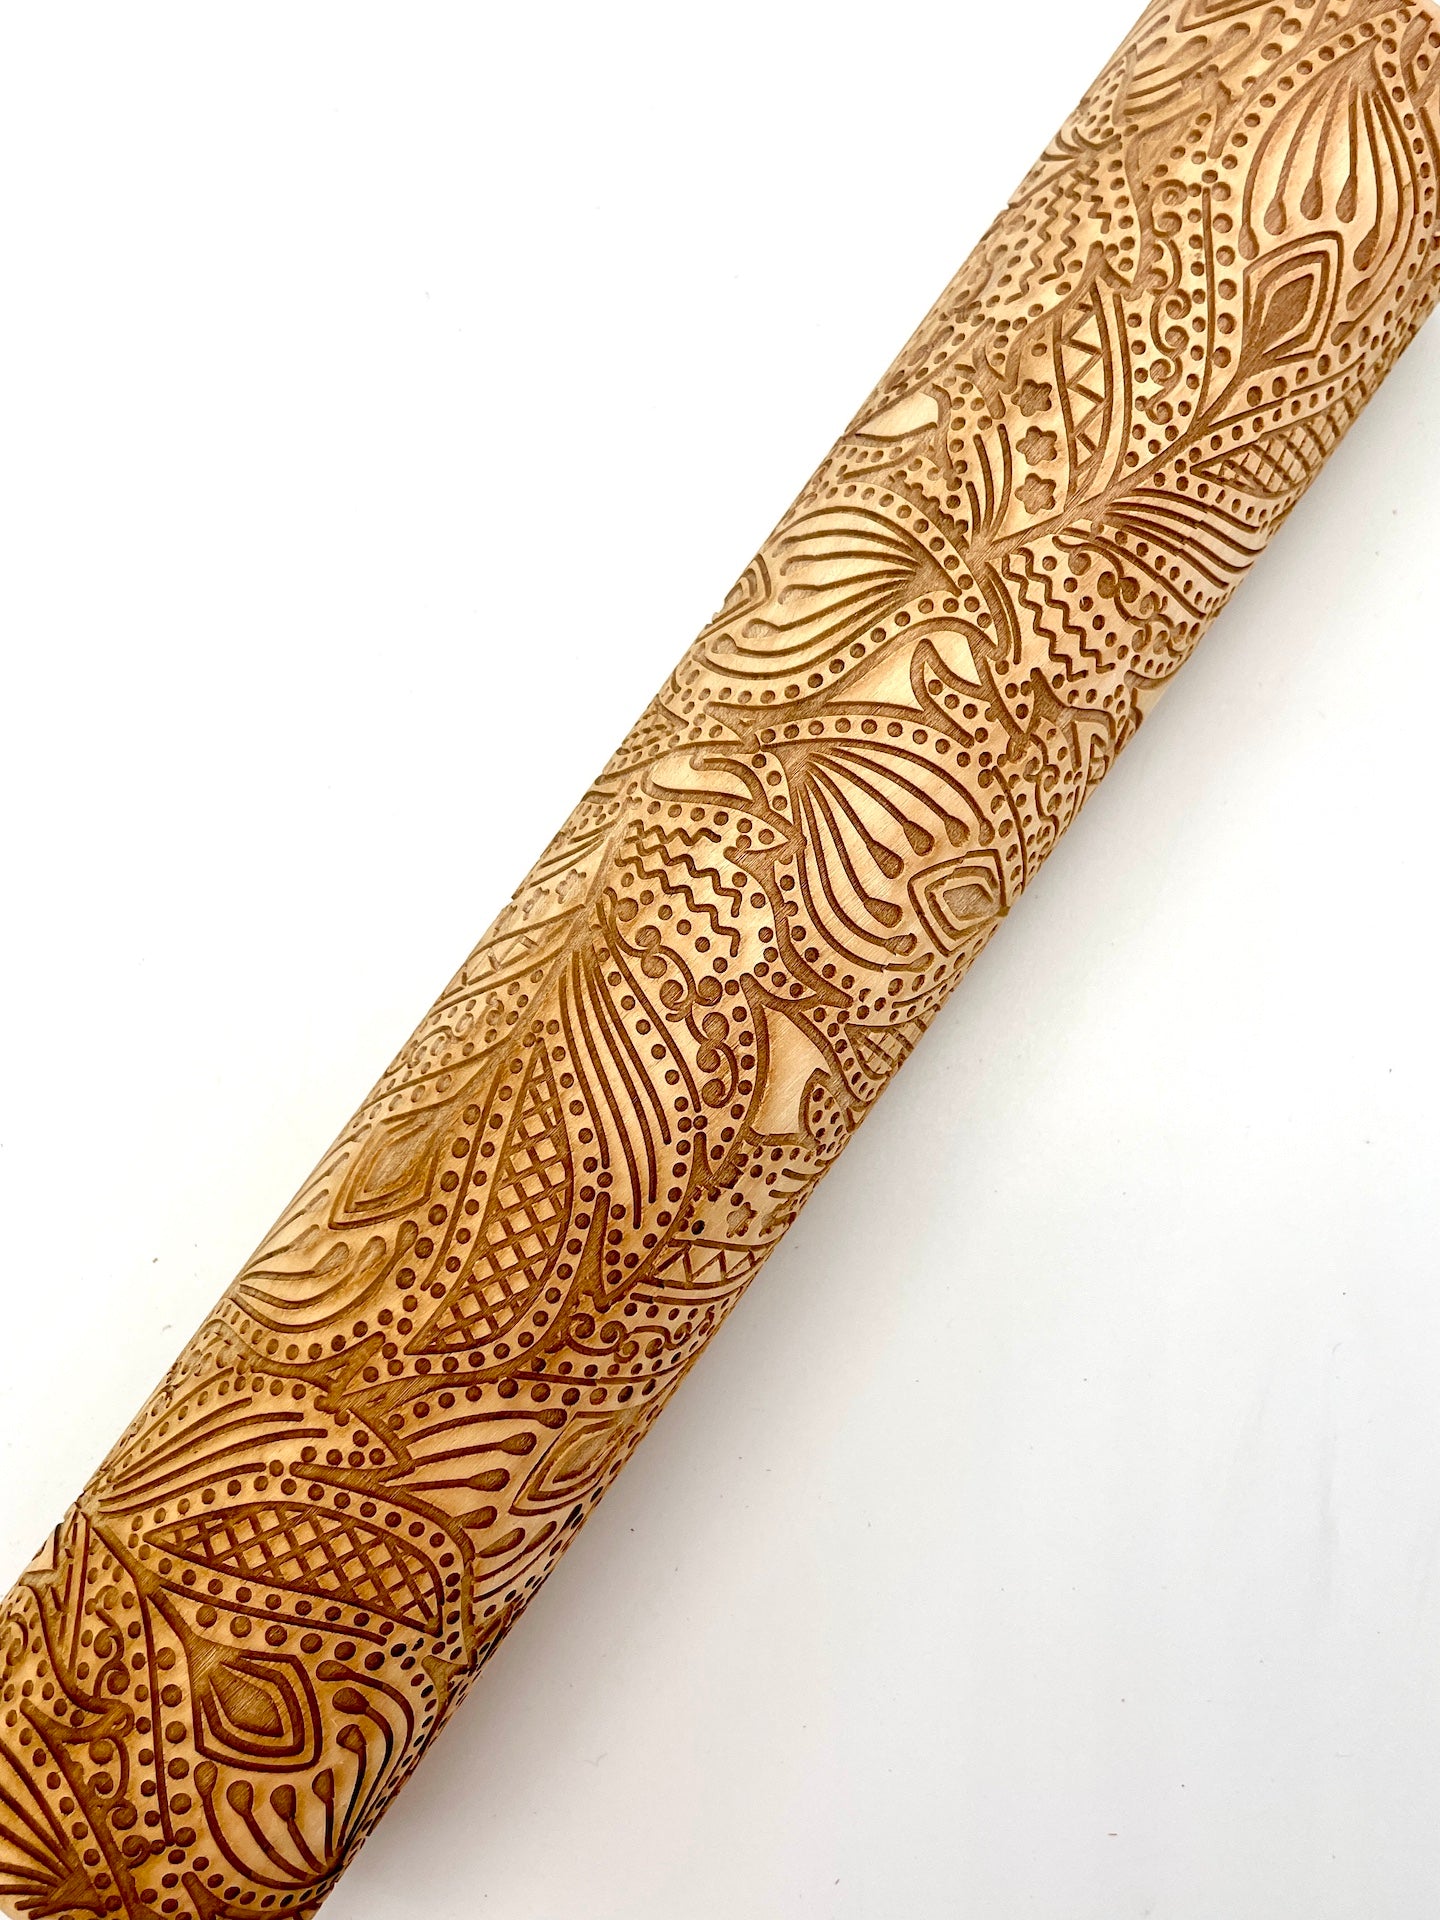 Abstract Leaves Textured Rolling Pin